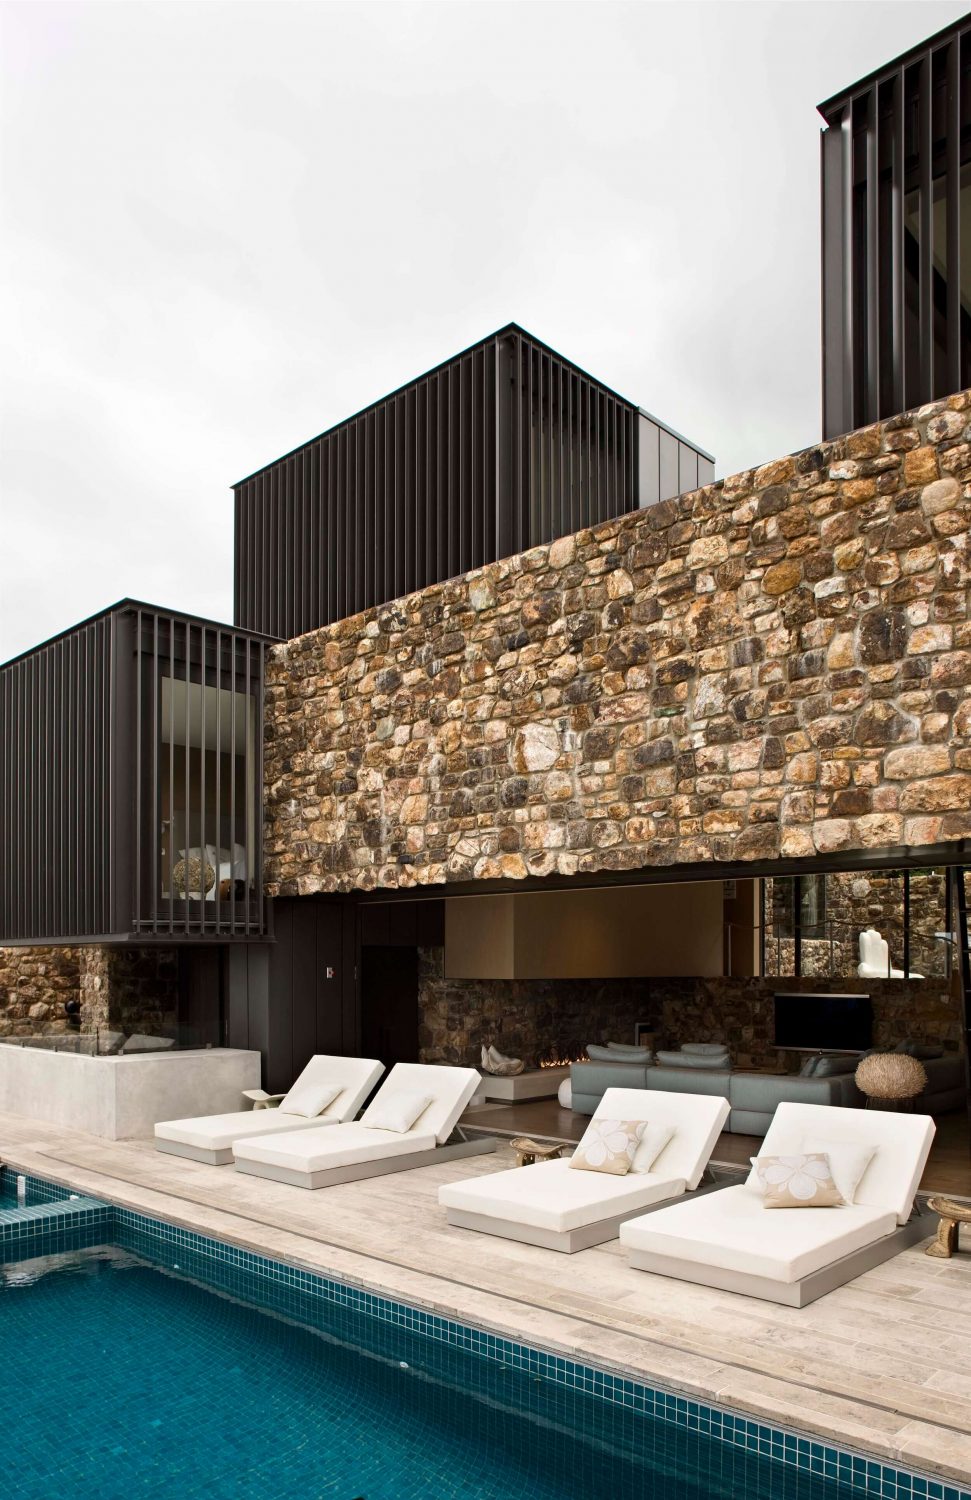 Local Rock House by Pattersons